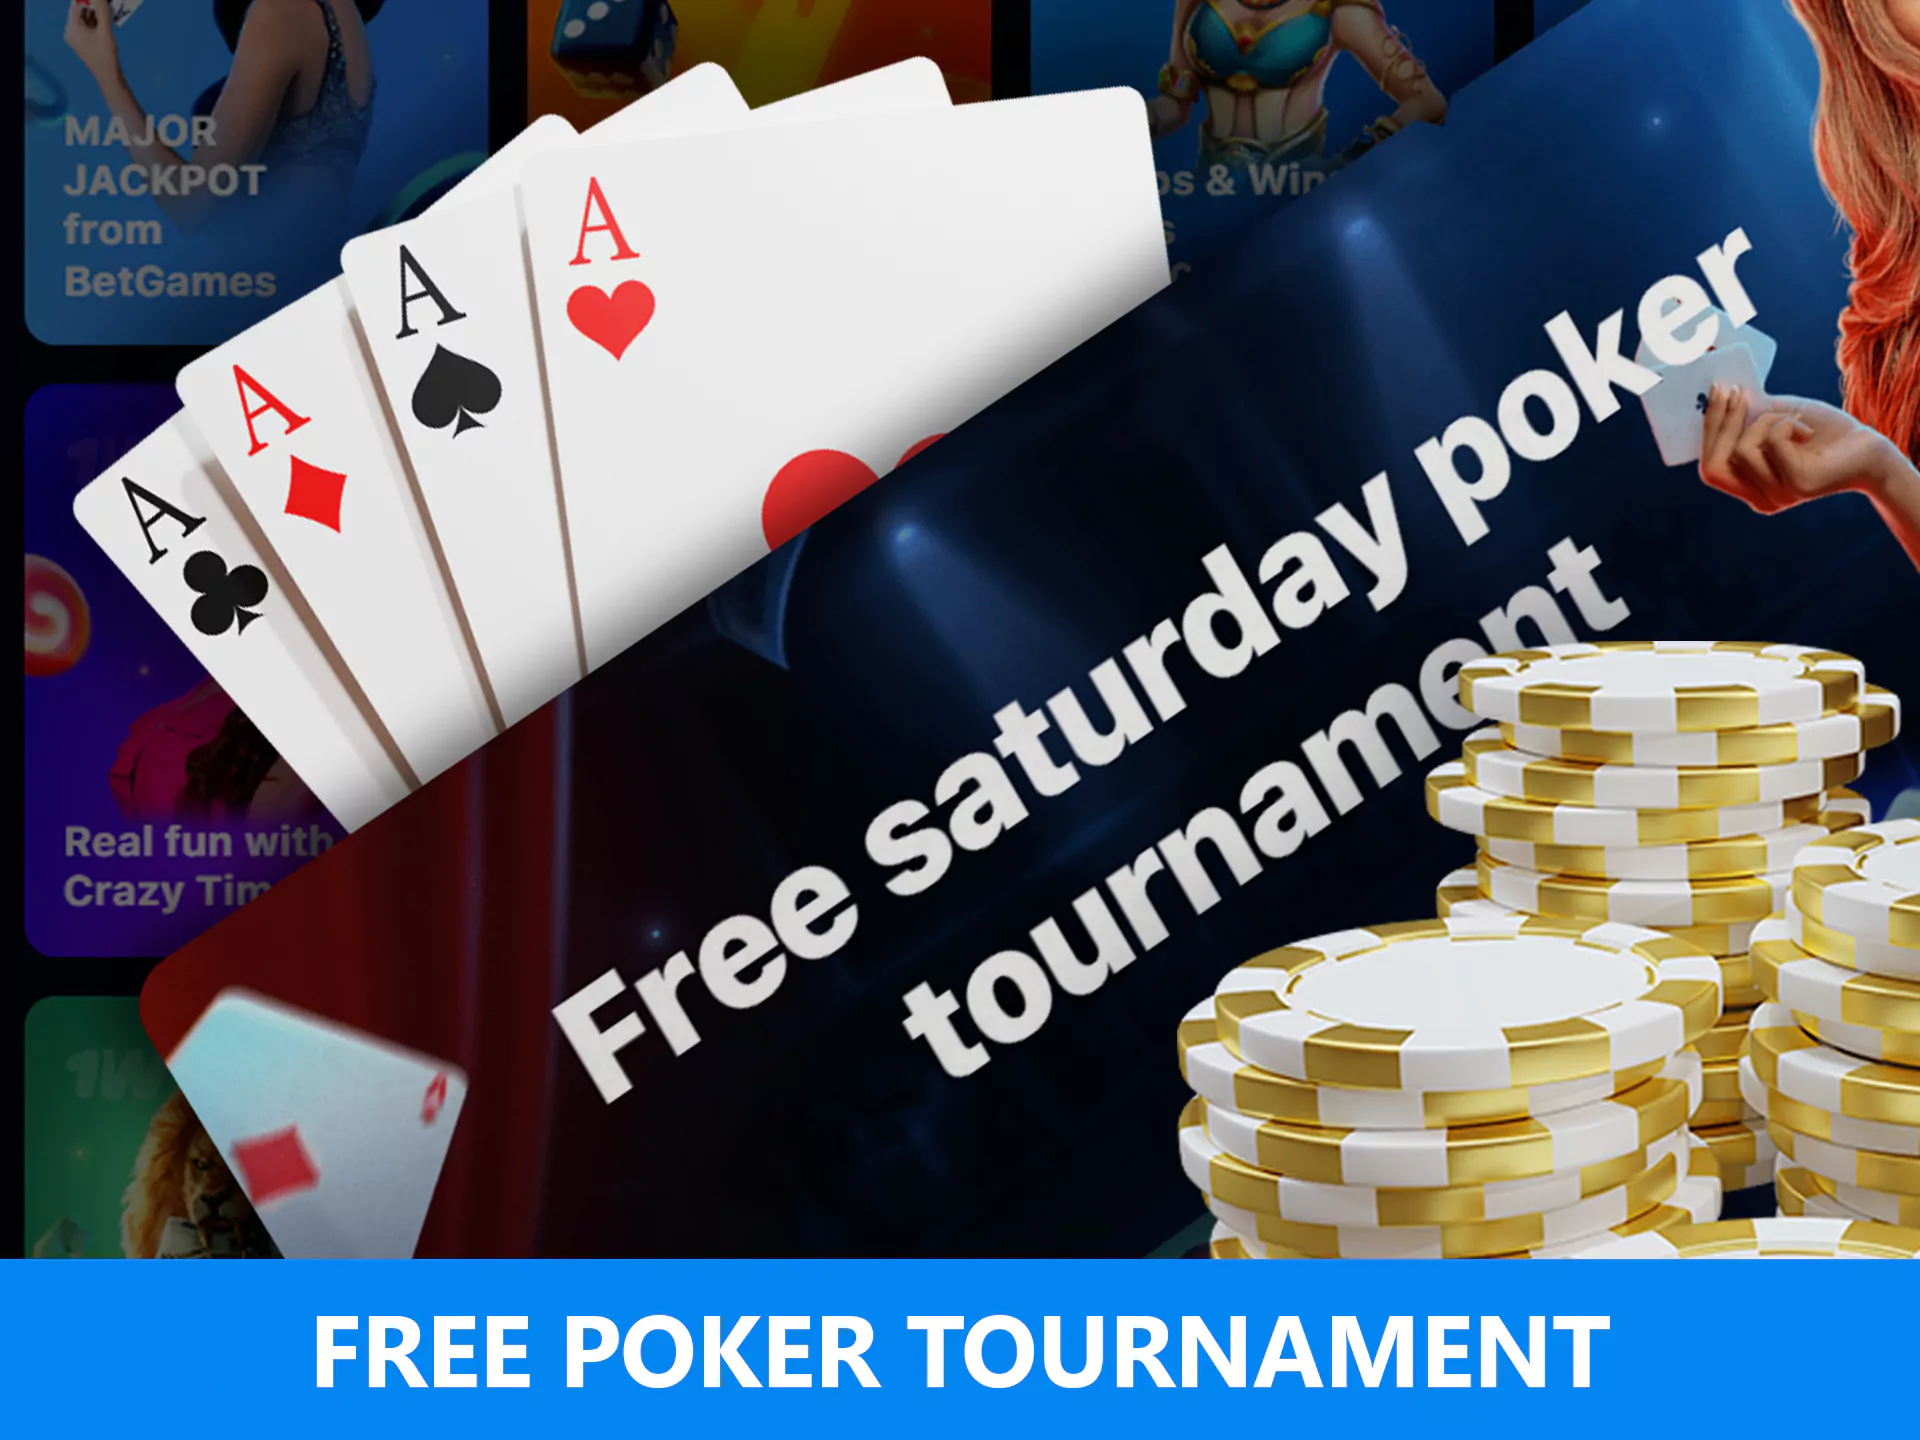 If you are good at poker, you check your skills at one of the tournaments.